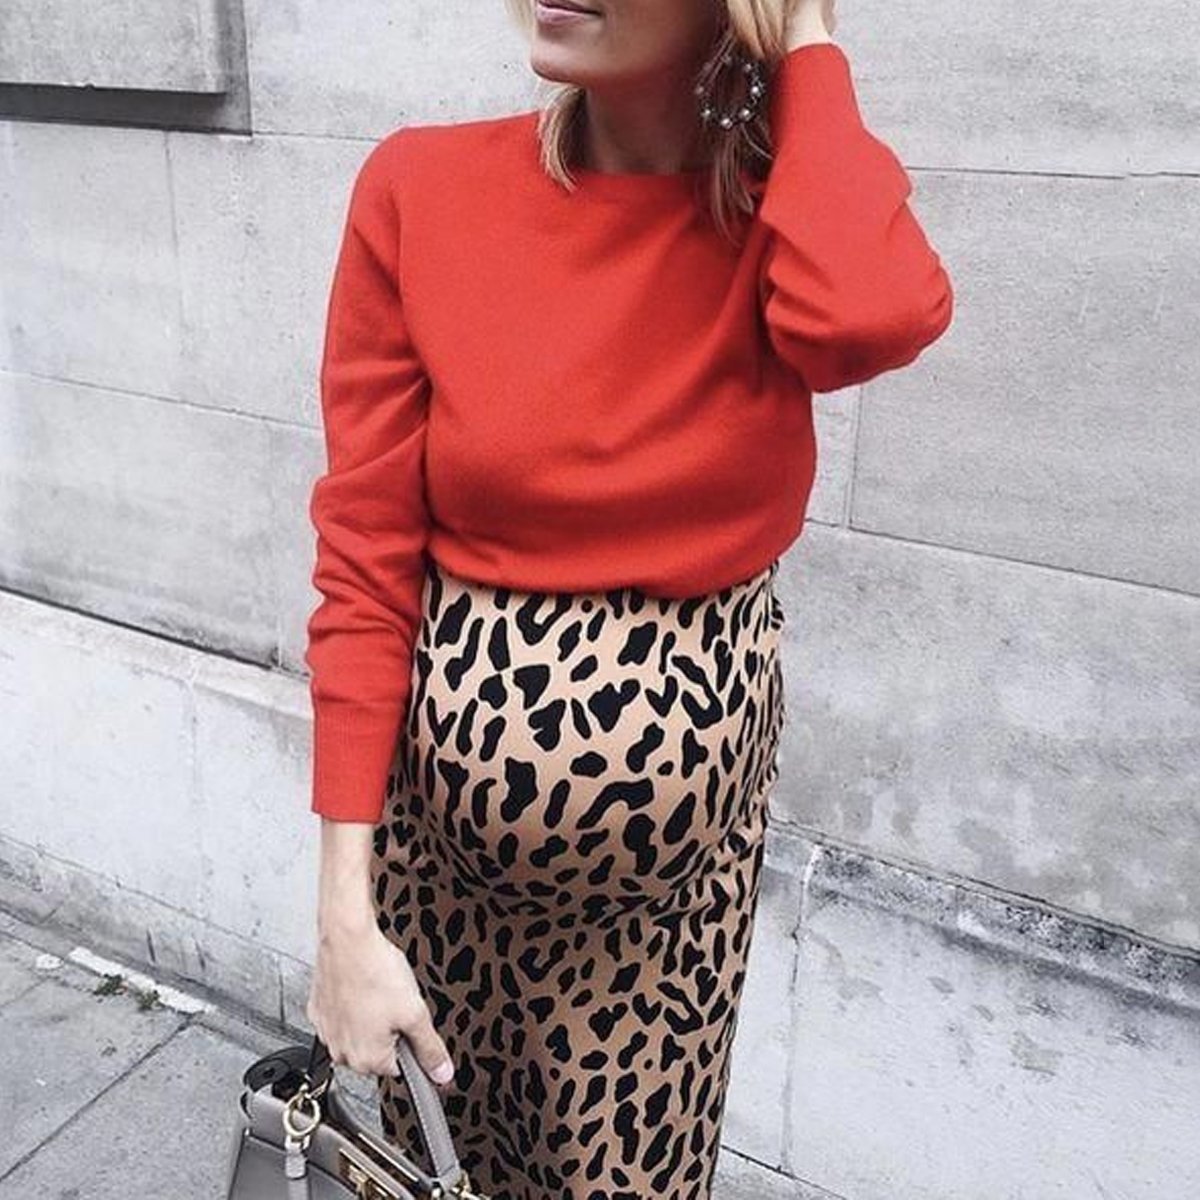 Maternity Red Top And Leopard Print Dress